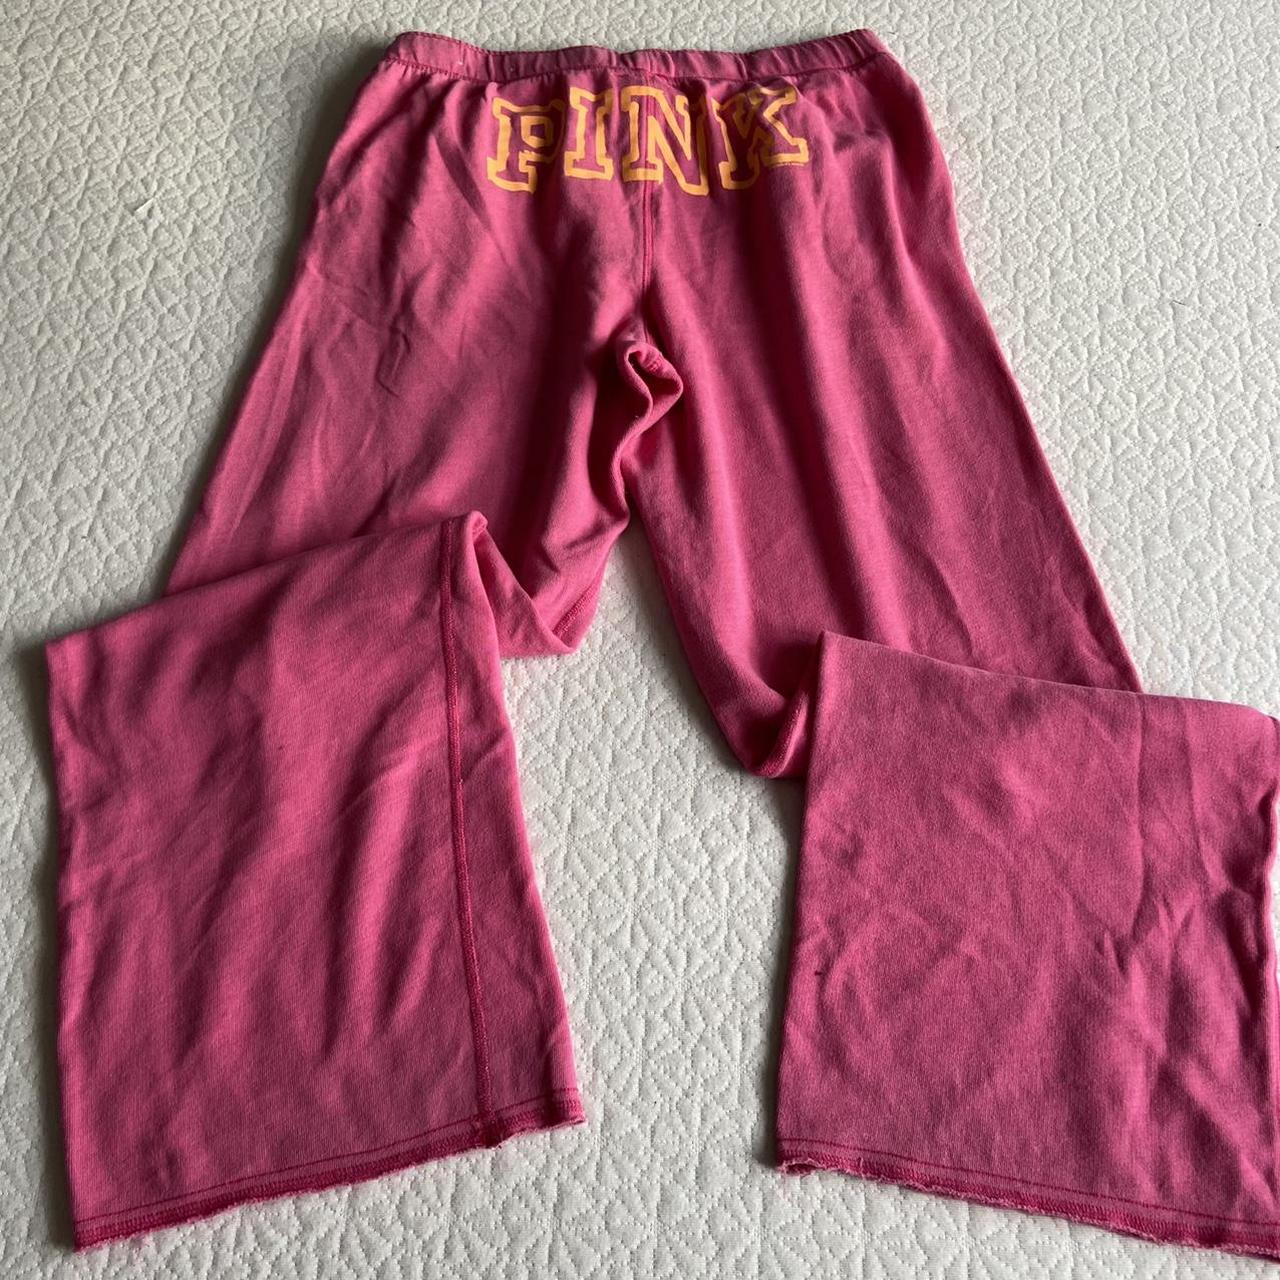 Early 2000s low rise PINK by Victoria's Secret sweat - Depop